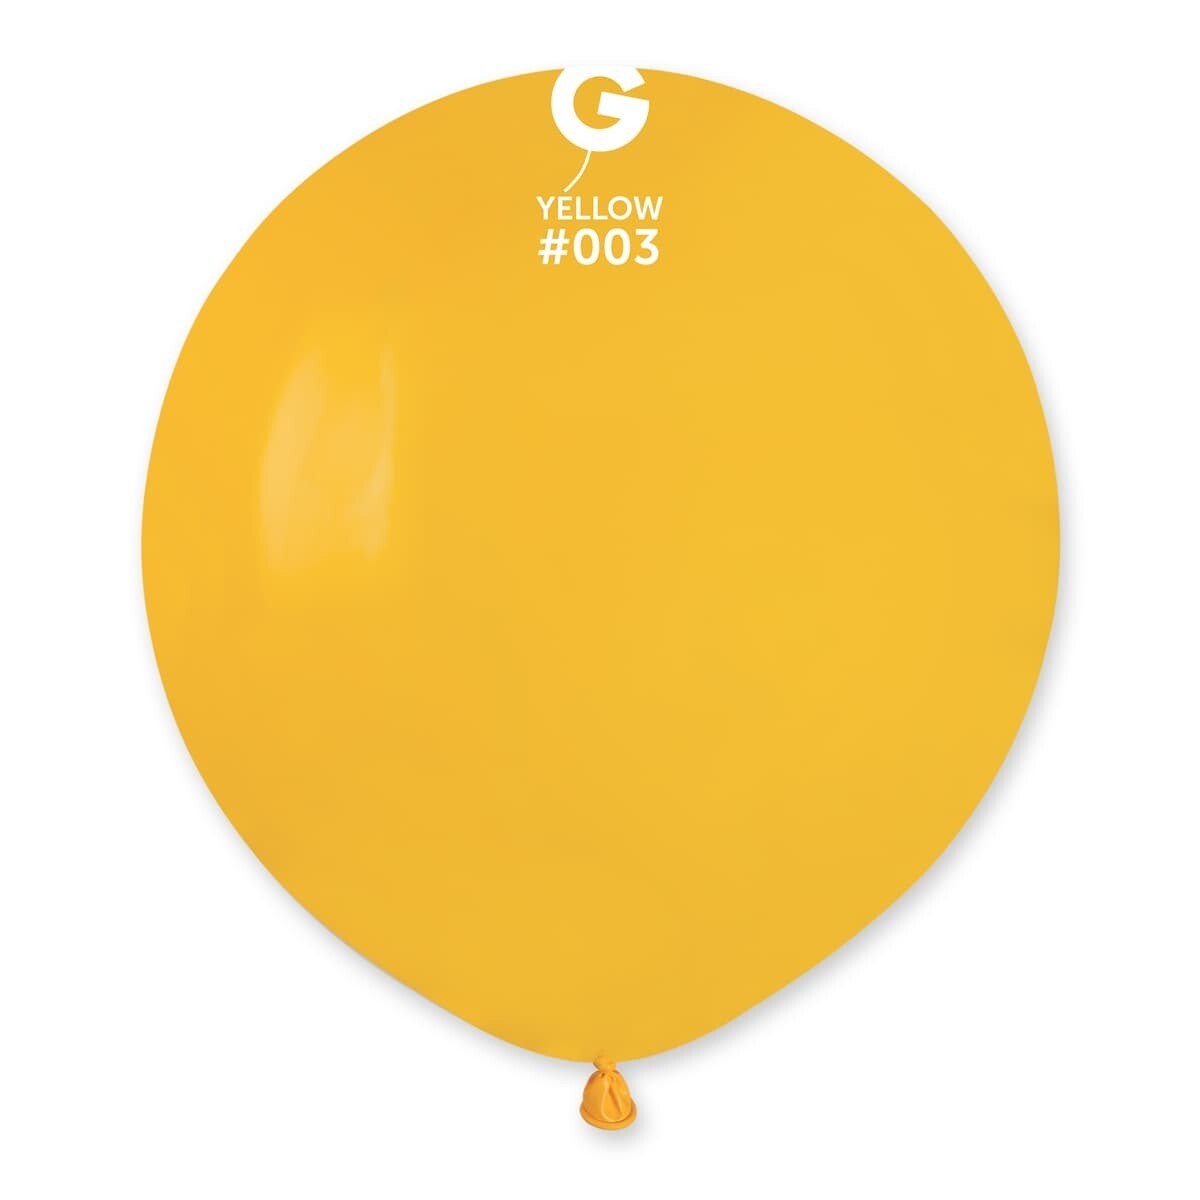 G150: #003 Yellow 150353 Standard Color 19 in